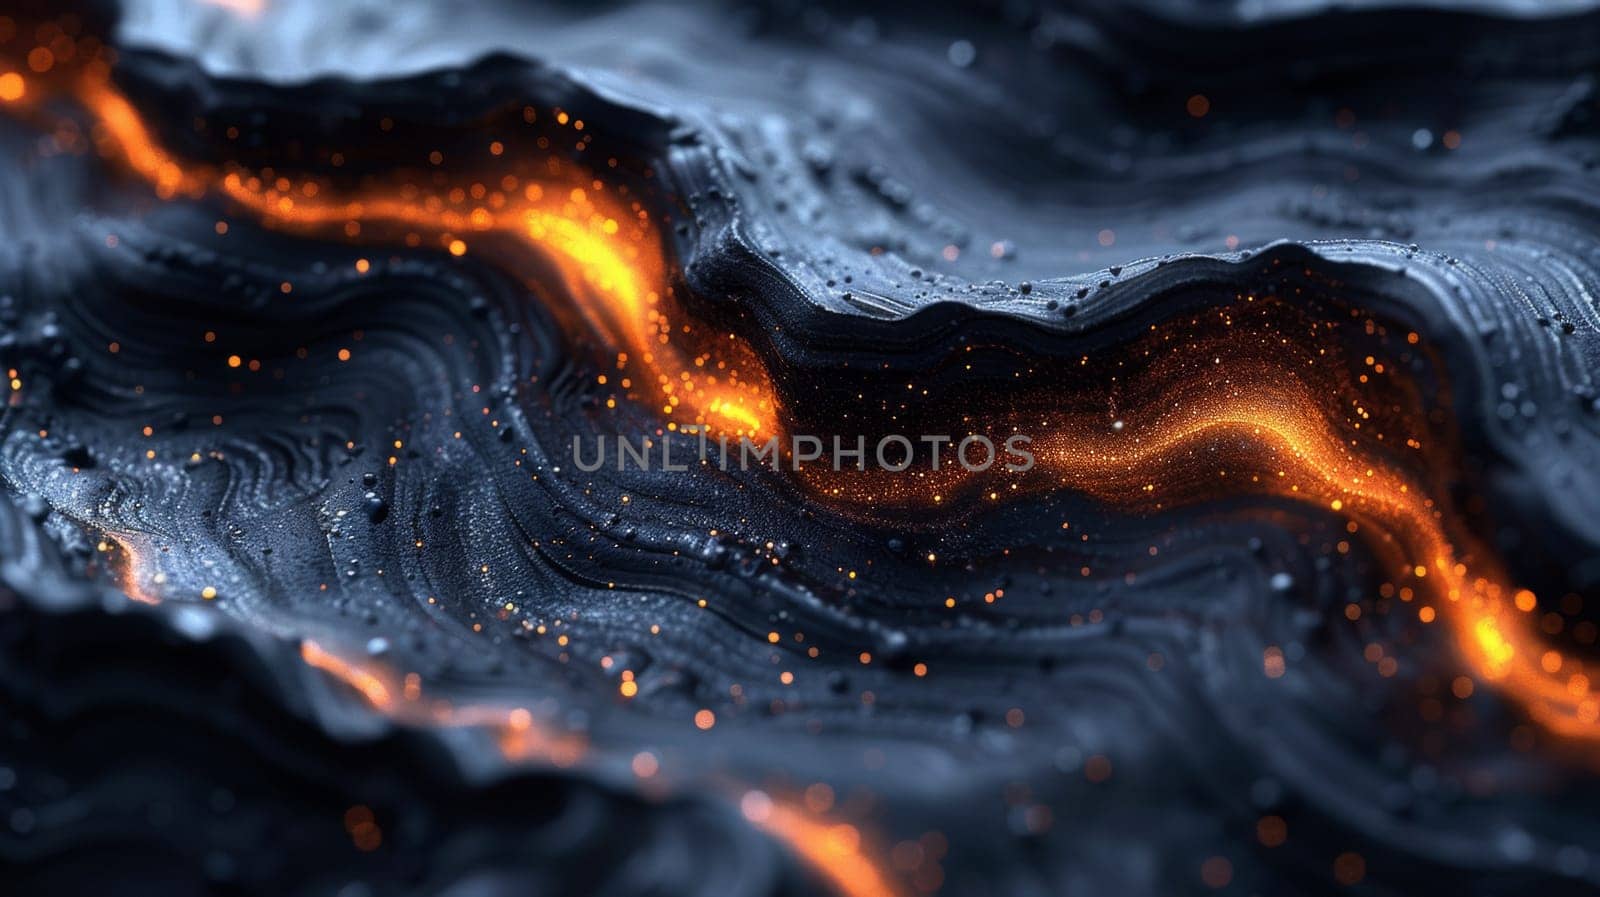 A close up of a black and orange pattern with fire